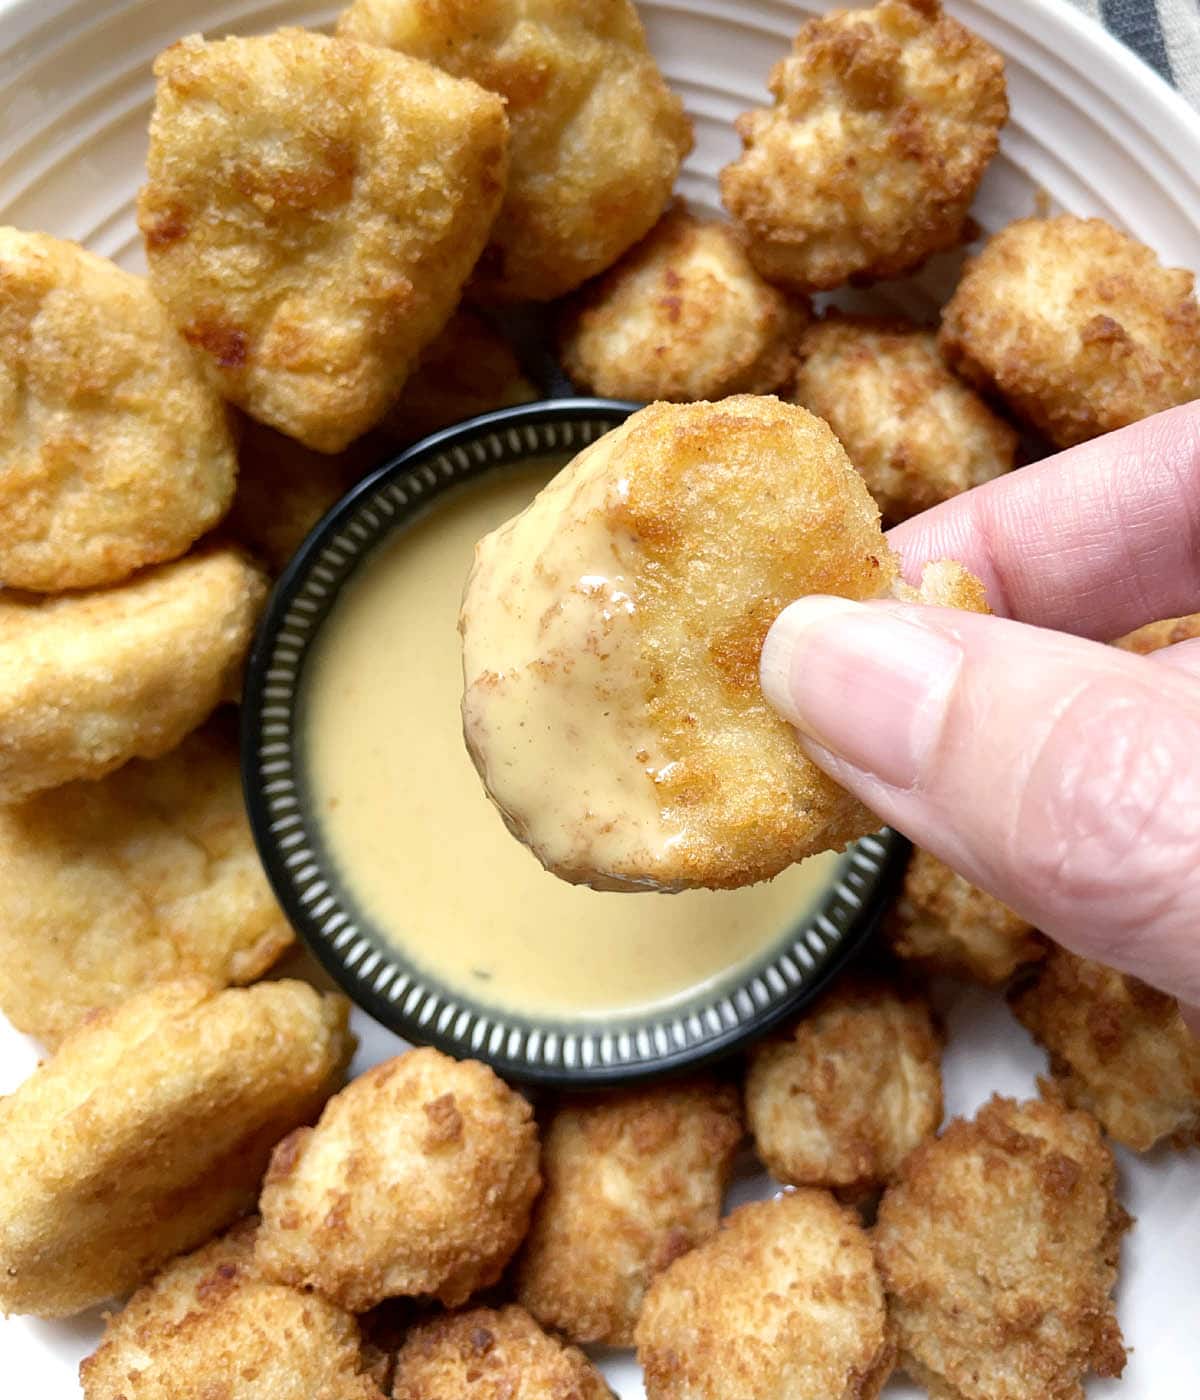 Close-up of a hand holding a breaded chicken nugget with yellow honey mustard dressing.